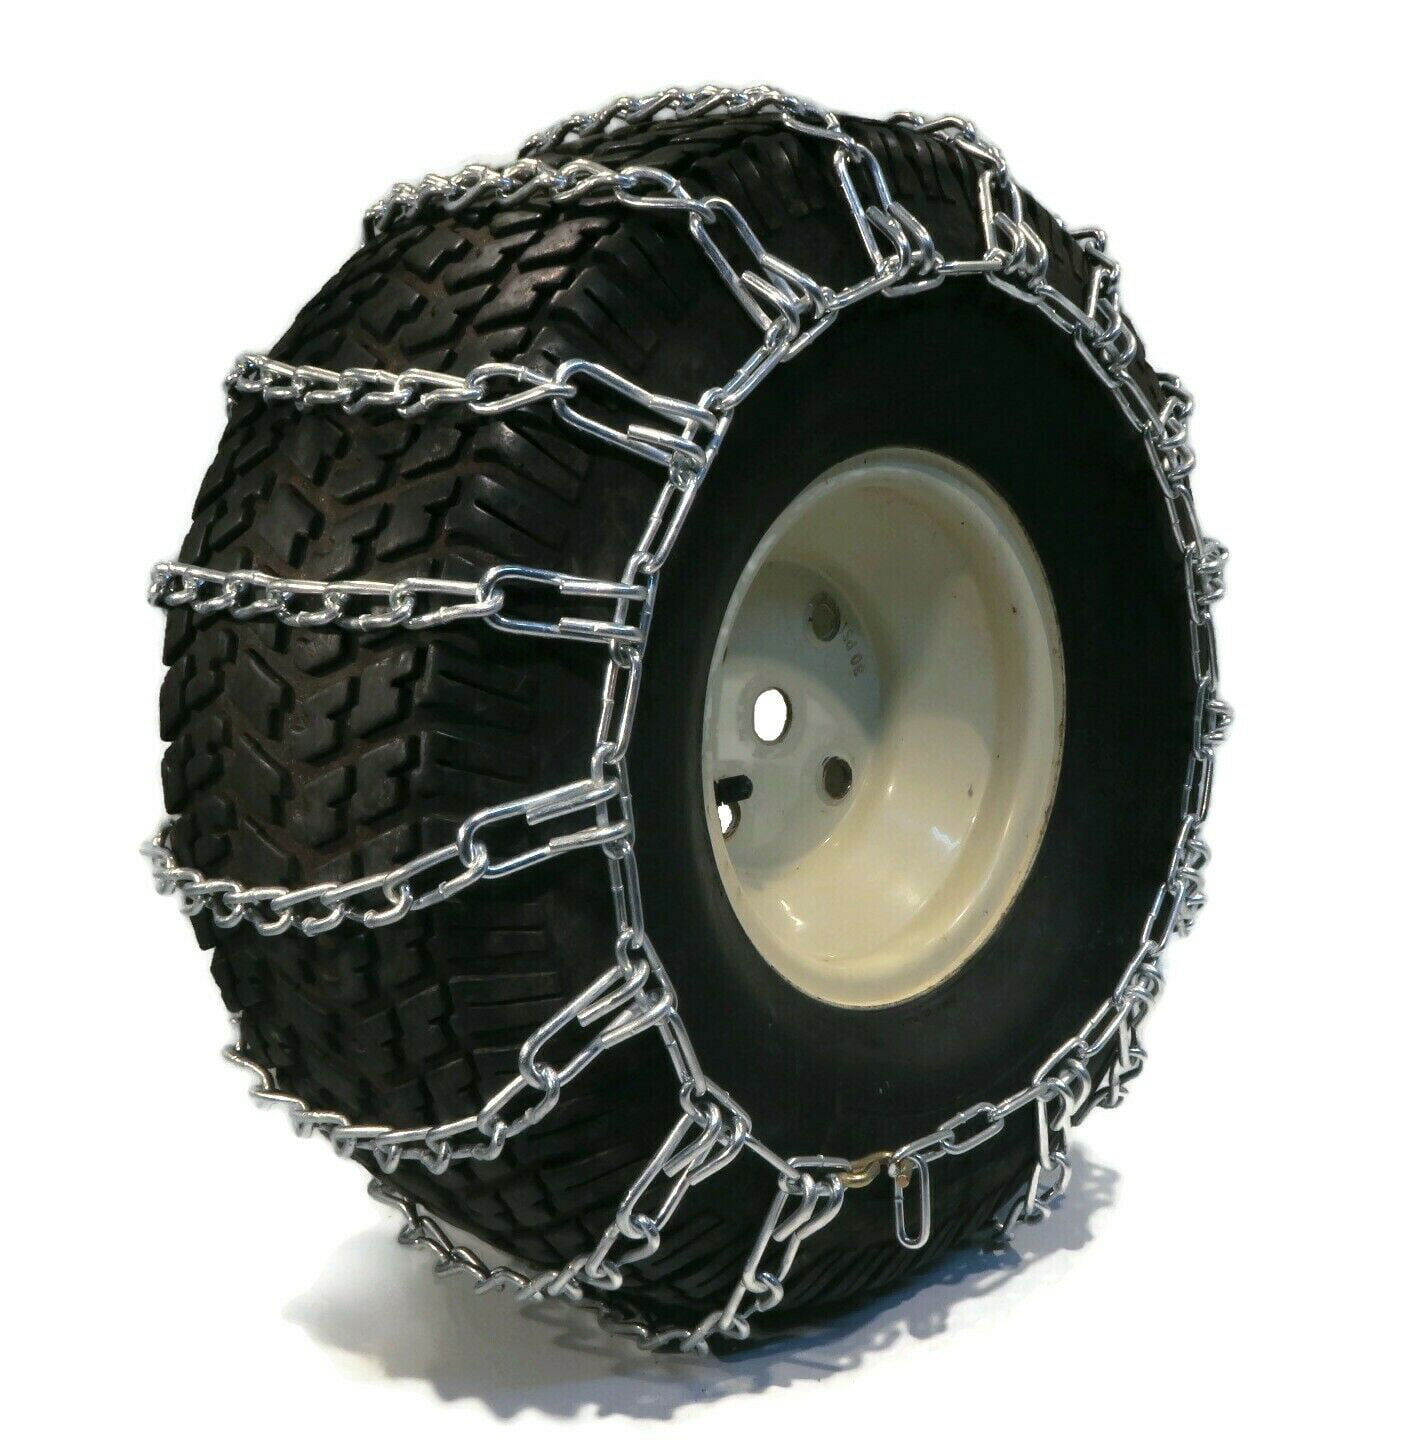 The ROP Shop Front & Rear TIRE Chains 2-Link for John Deere 400 420 425 Tractor Snow Blower 